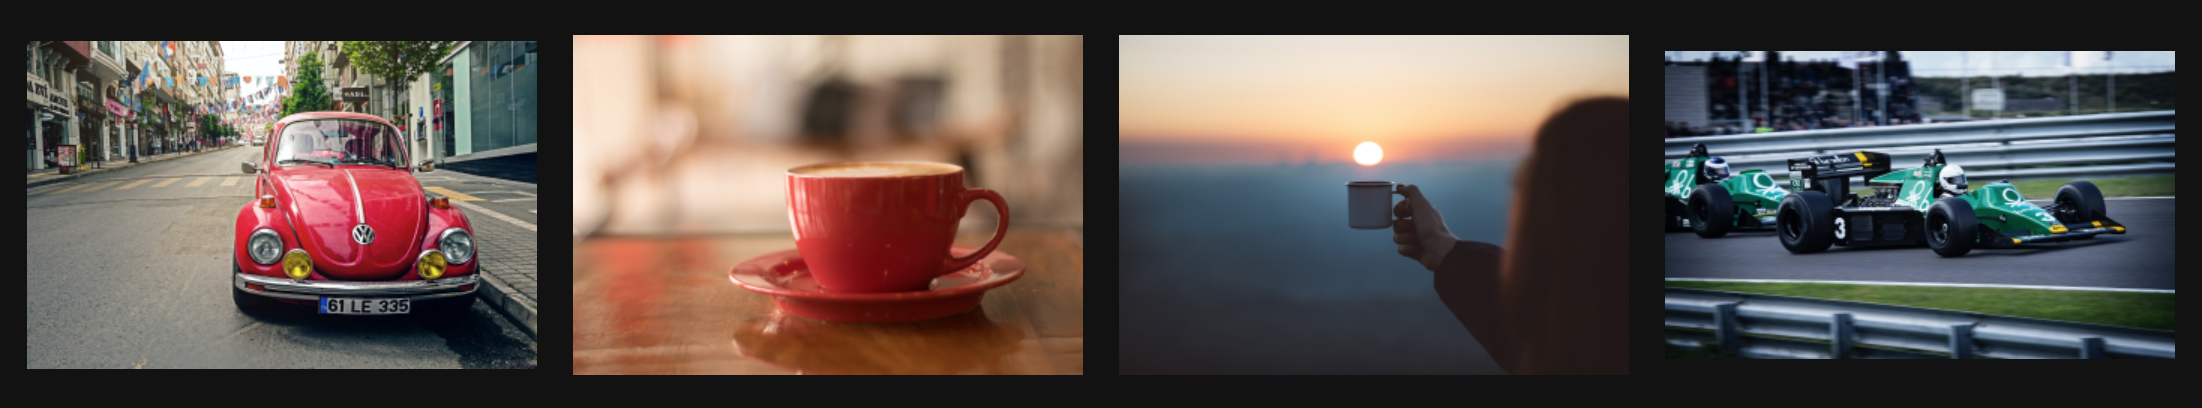 Multiple objects: Leftmost side is a parked red volkswagen vehicle, to the right is a red cup of coffee, next object is a mug raised with a sunrise as background, the rightmost object is Formula 1 race car